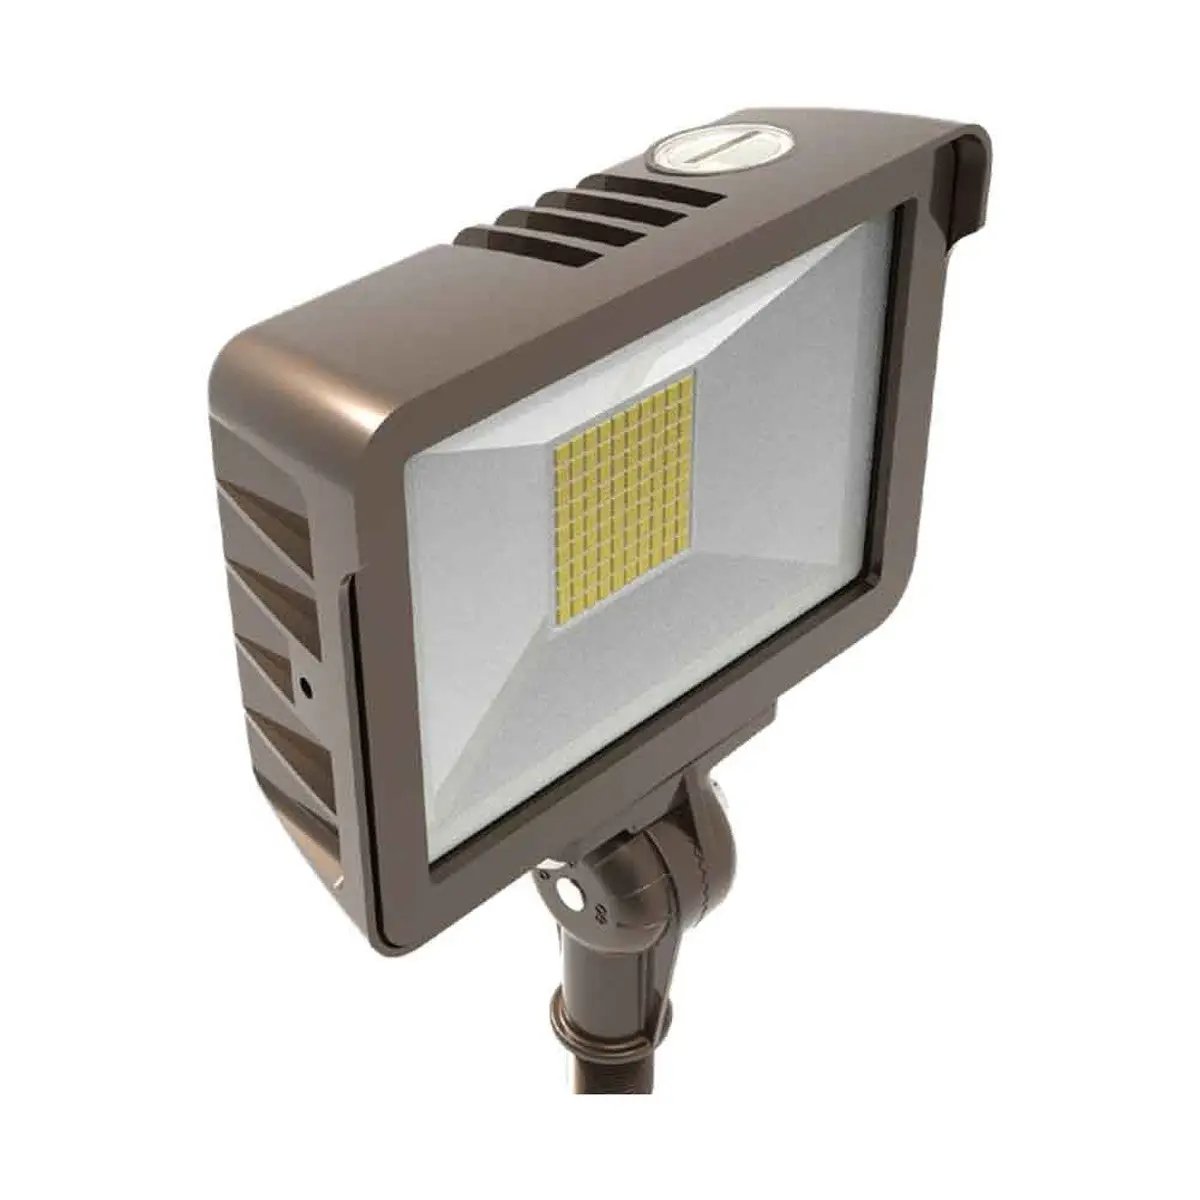 Waterproof Outdoor Flood Light with adjustable white light, universal mounting options, and color select feature. 5075 lumens, 35W LED, UL Listed, IP65 Rated, DLC Premium Listed.